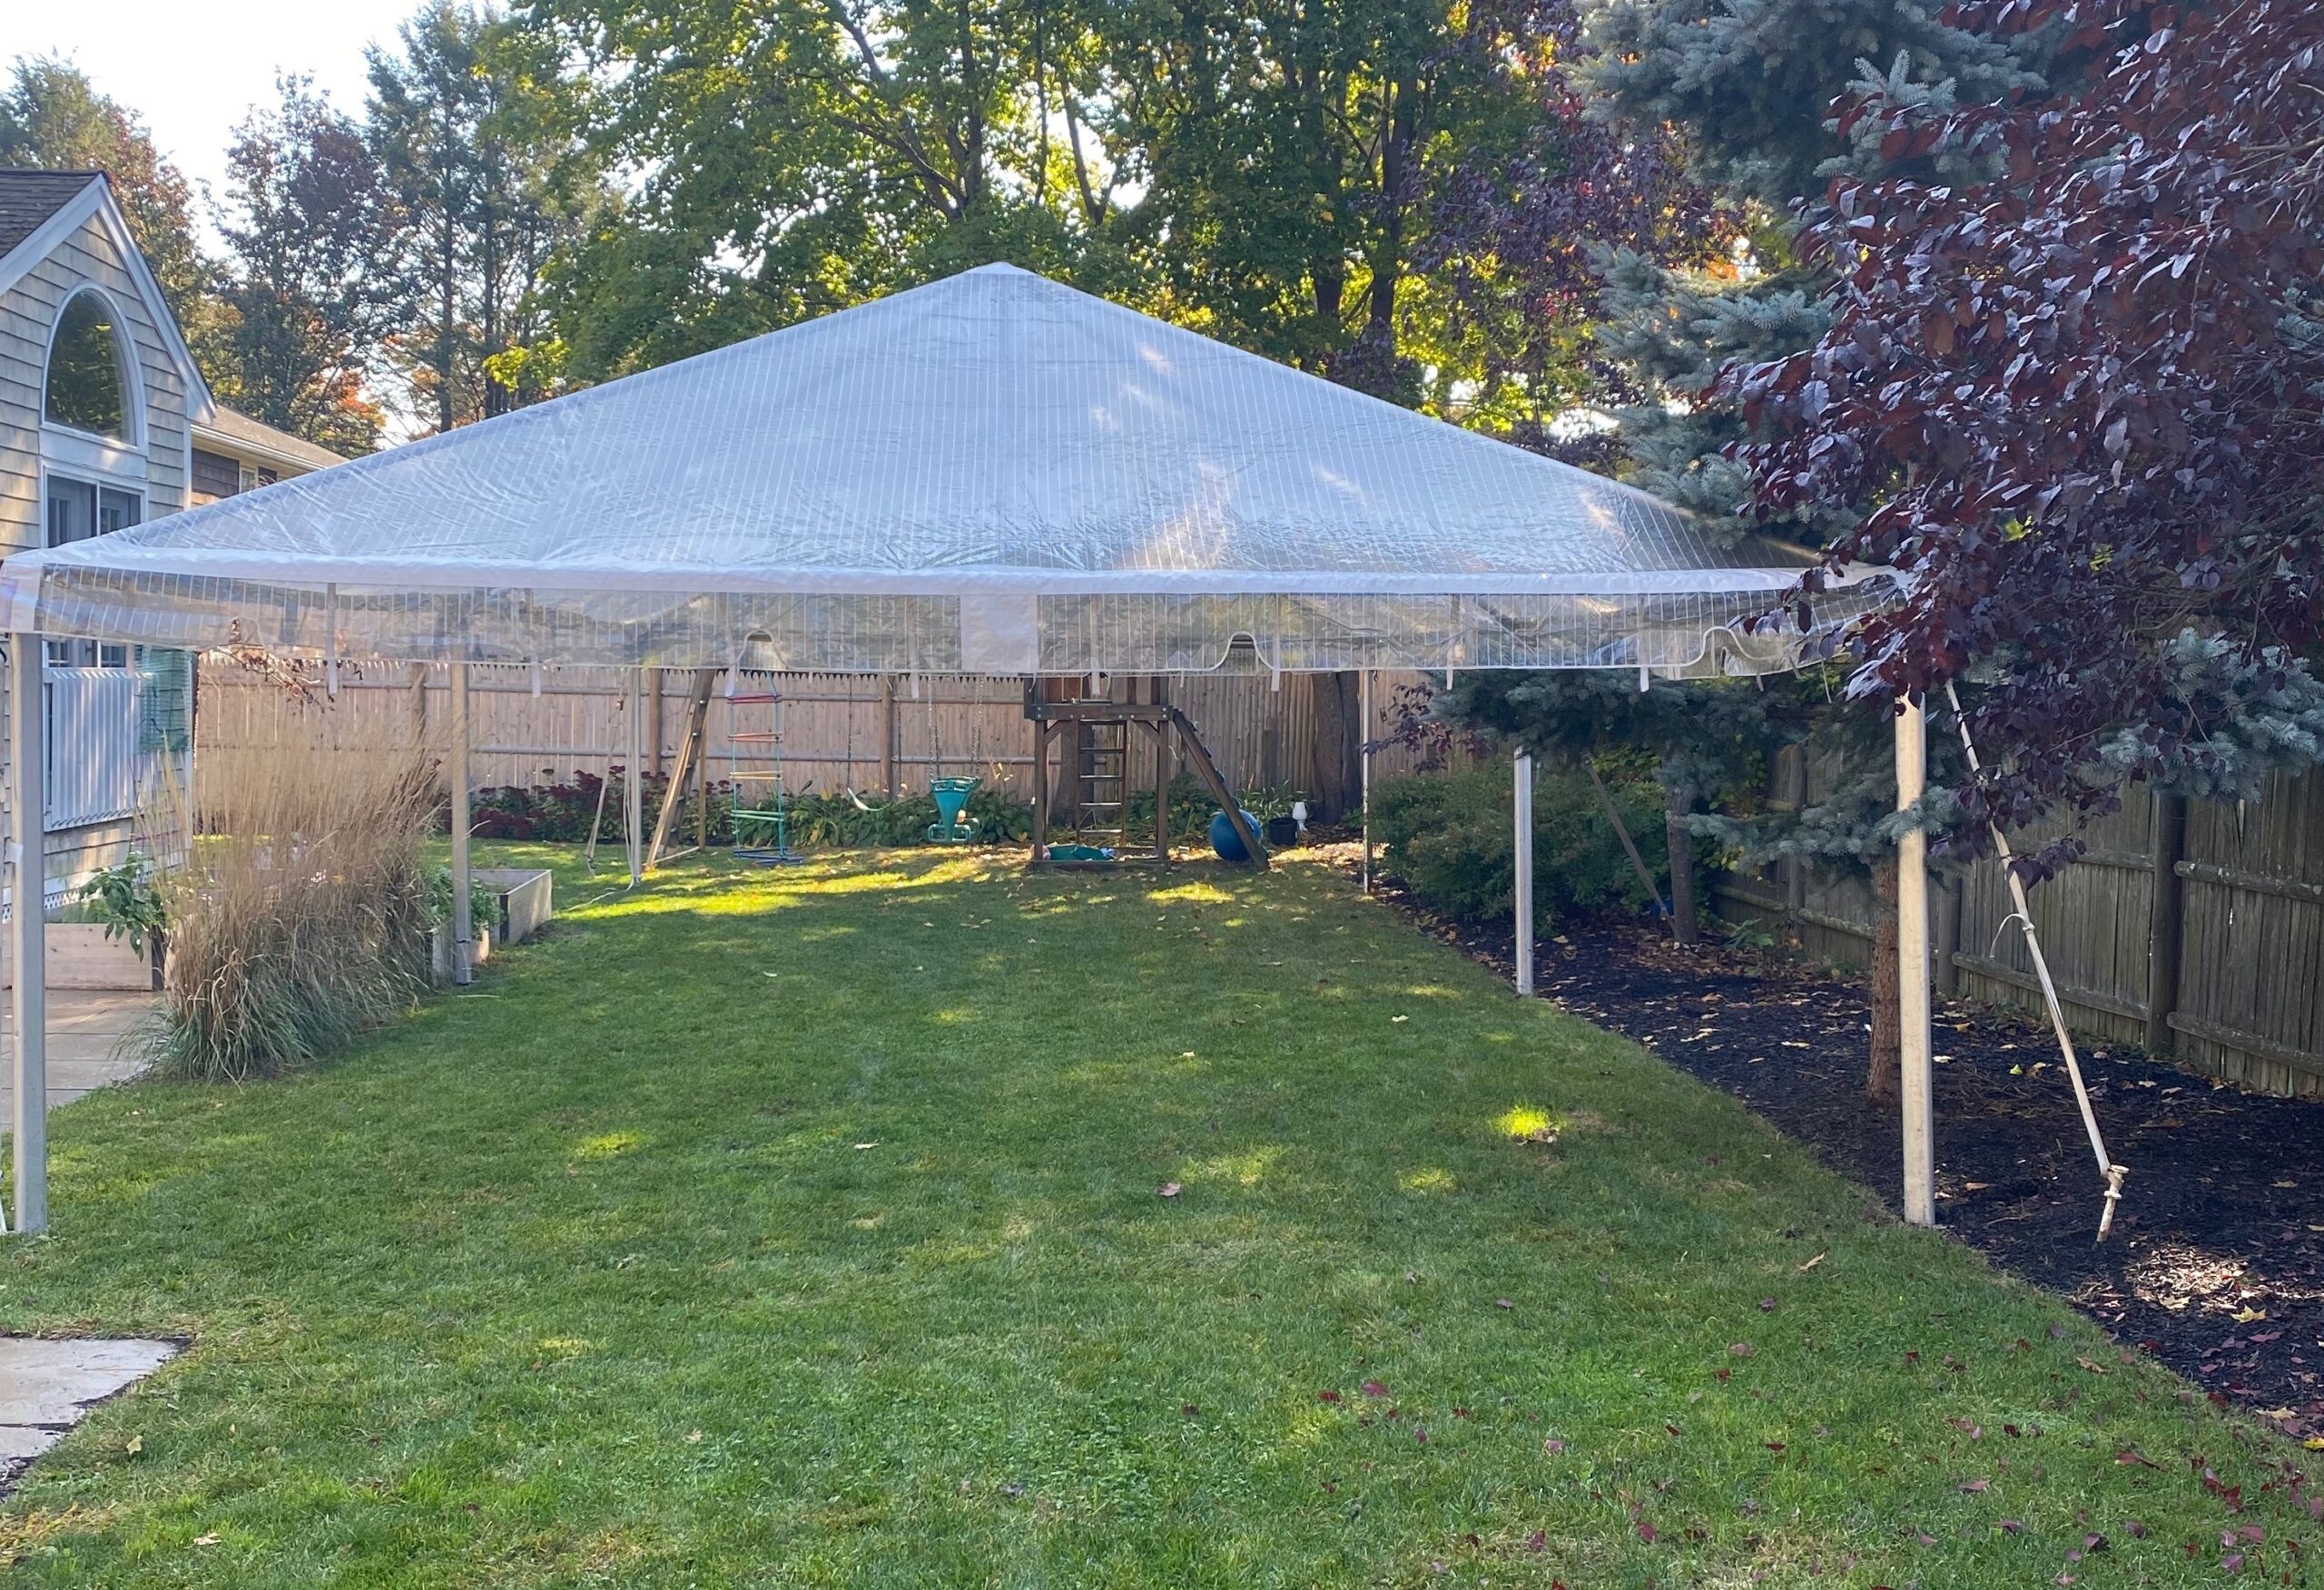 20' Wide Clear Frame Tent